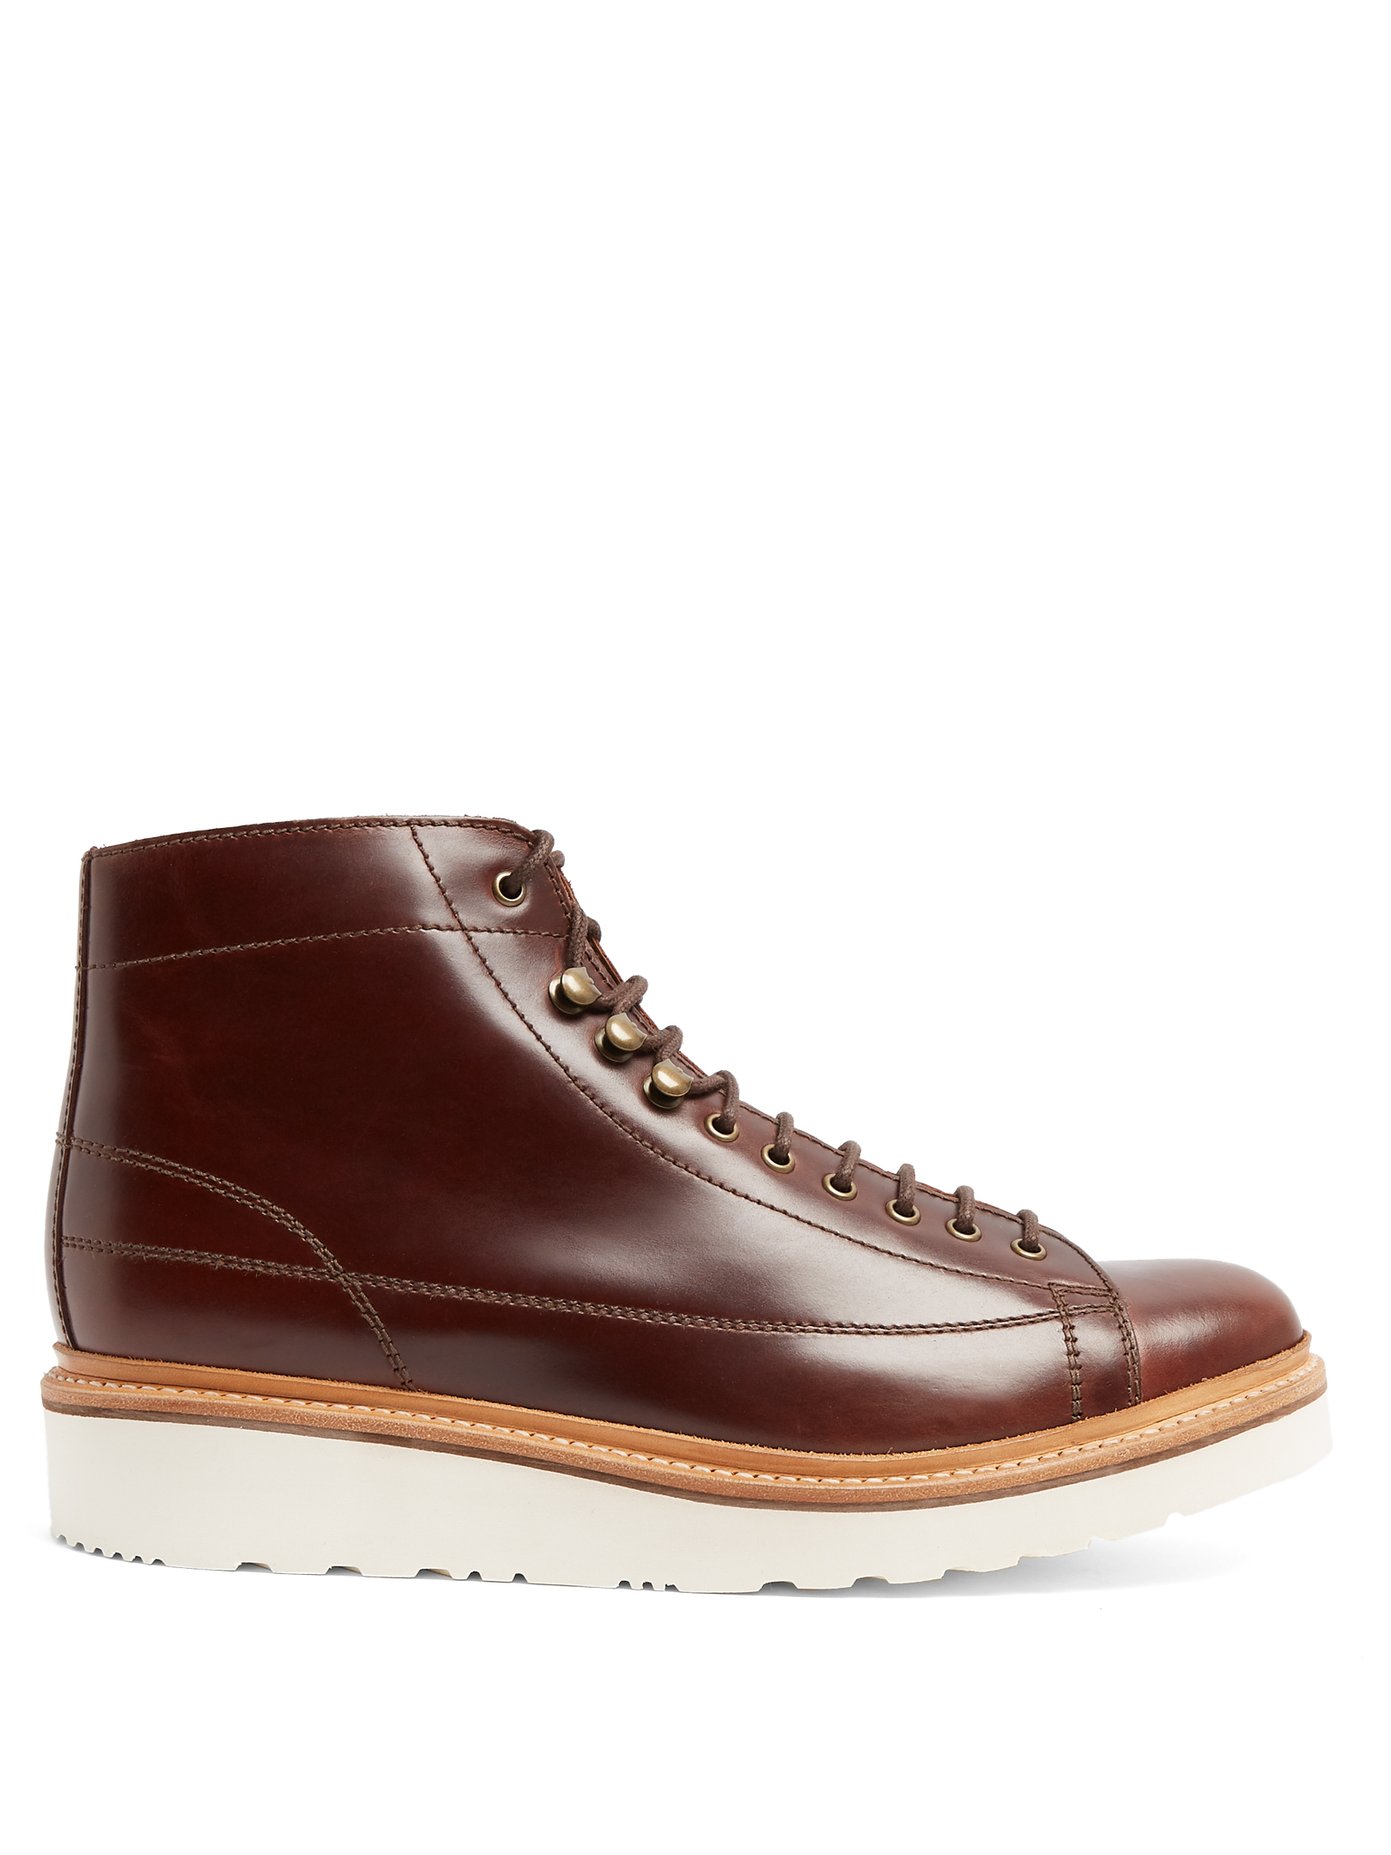 Andy leather ankle boots | Grenson 